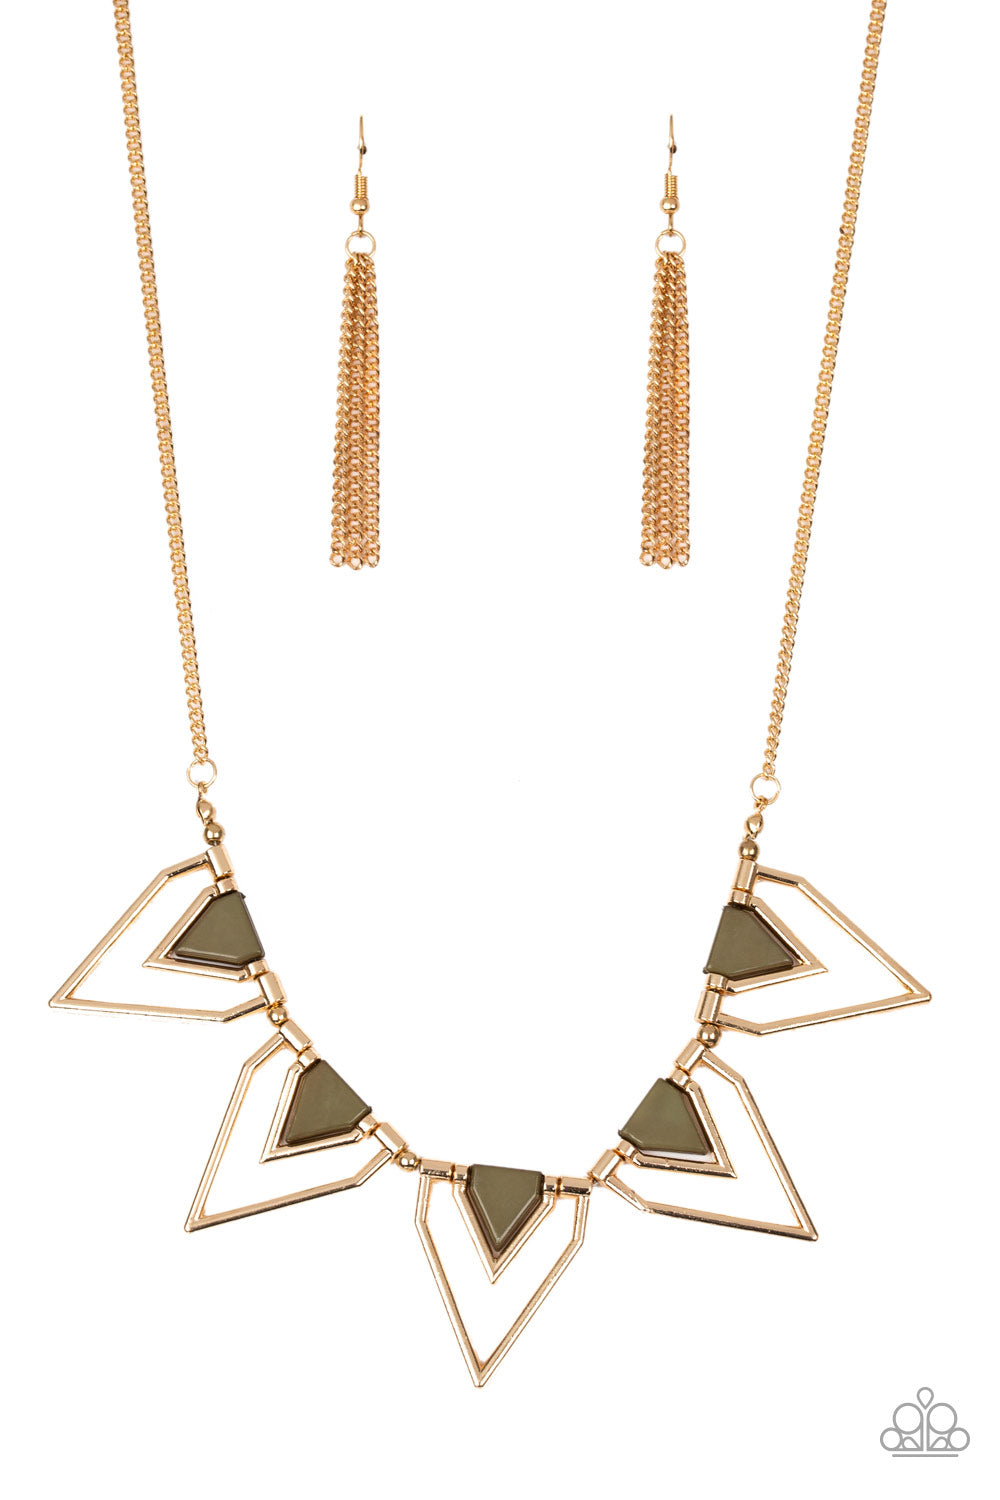 The Pack Leader - Green/Gold necklace